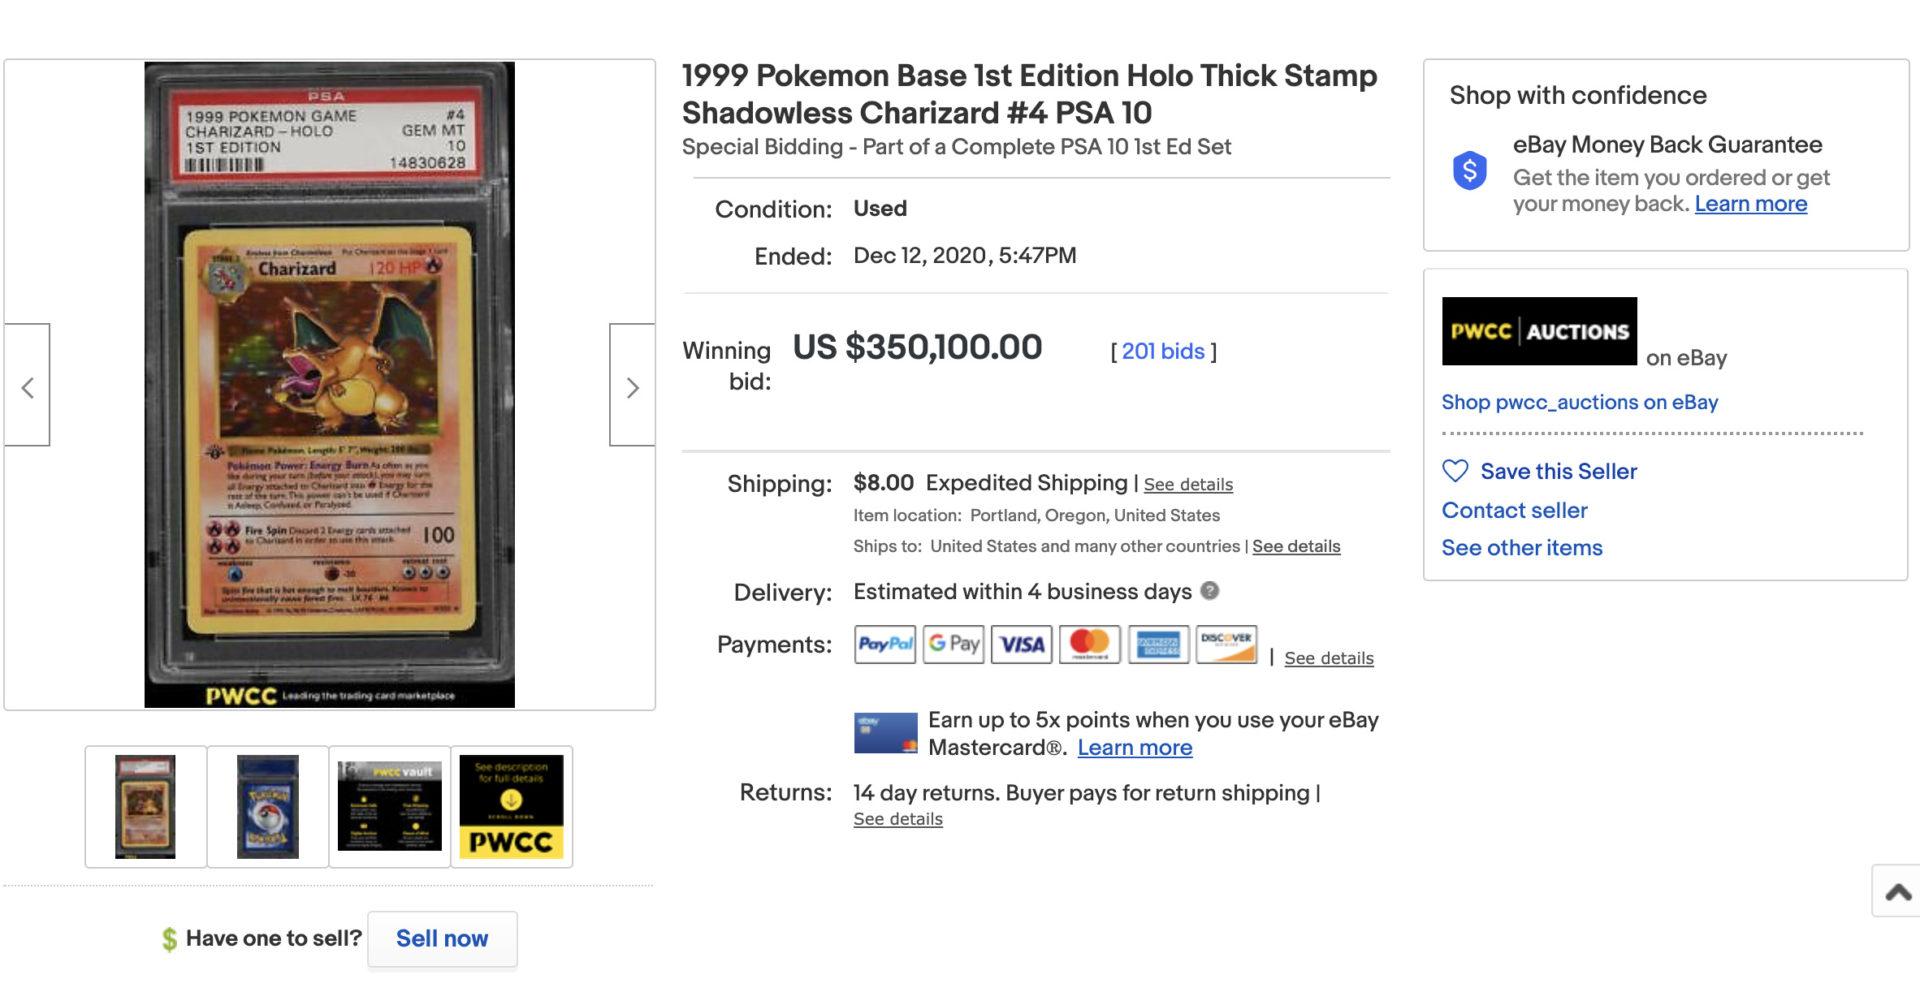 Screenshot of rare Charizard Pokemon card selling for $350k at auction.